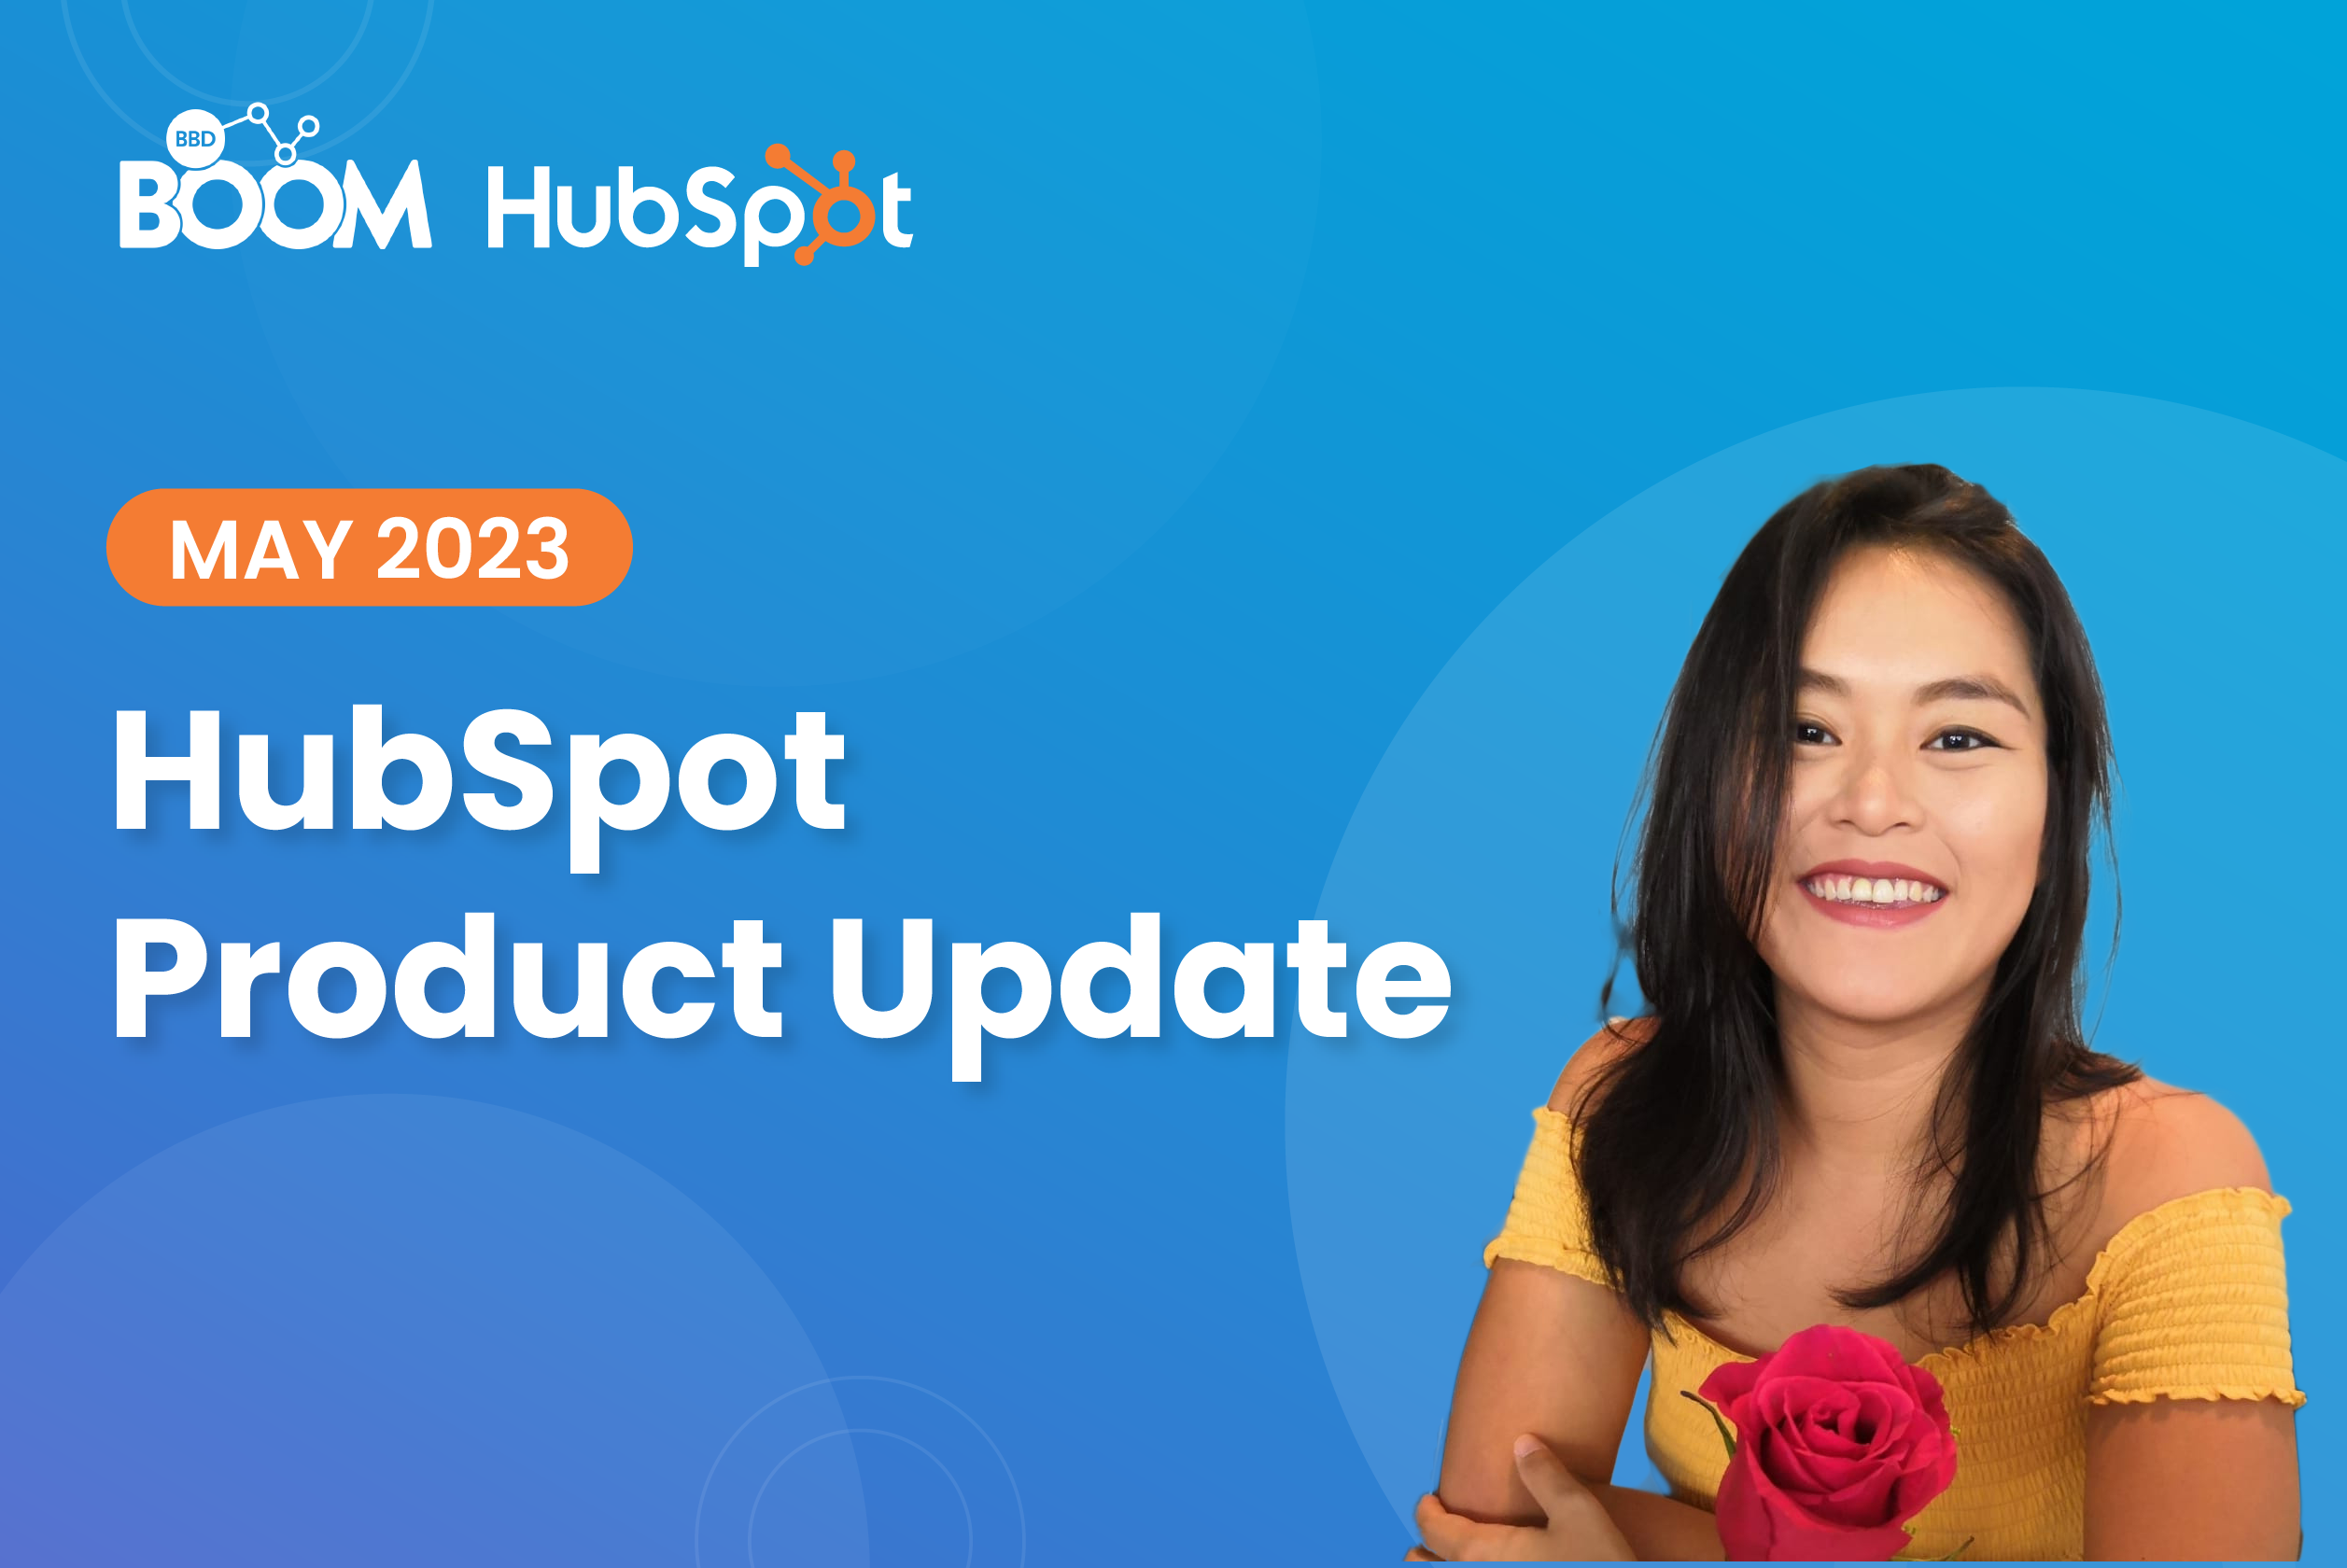 HubSpot Product Update: May 2023